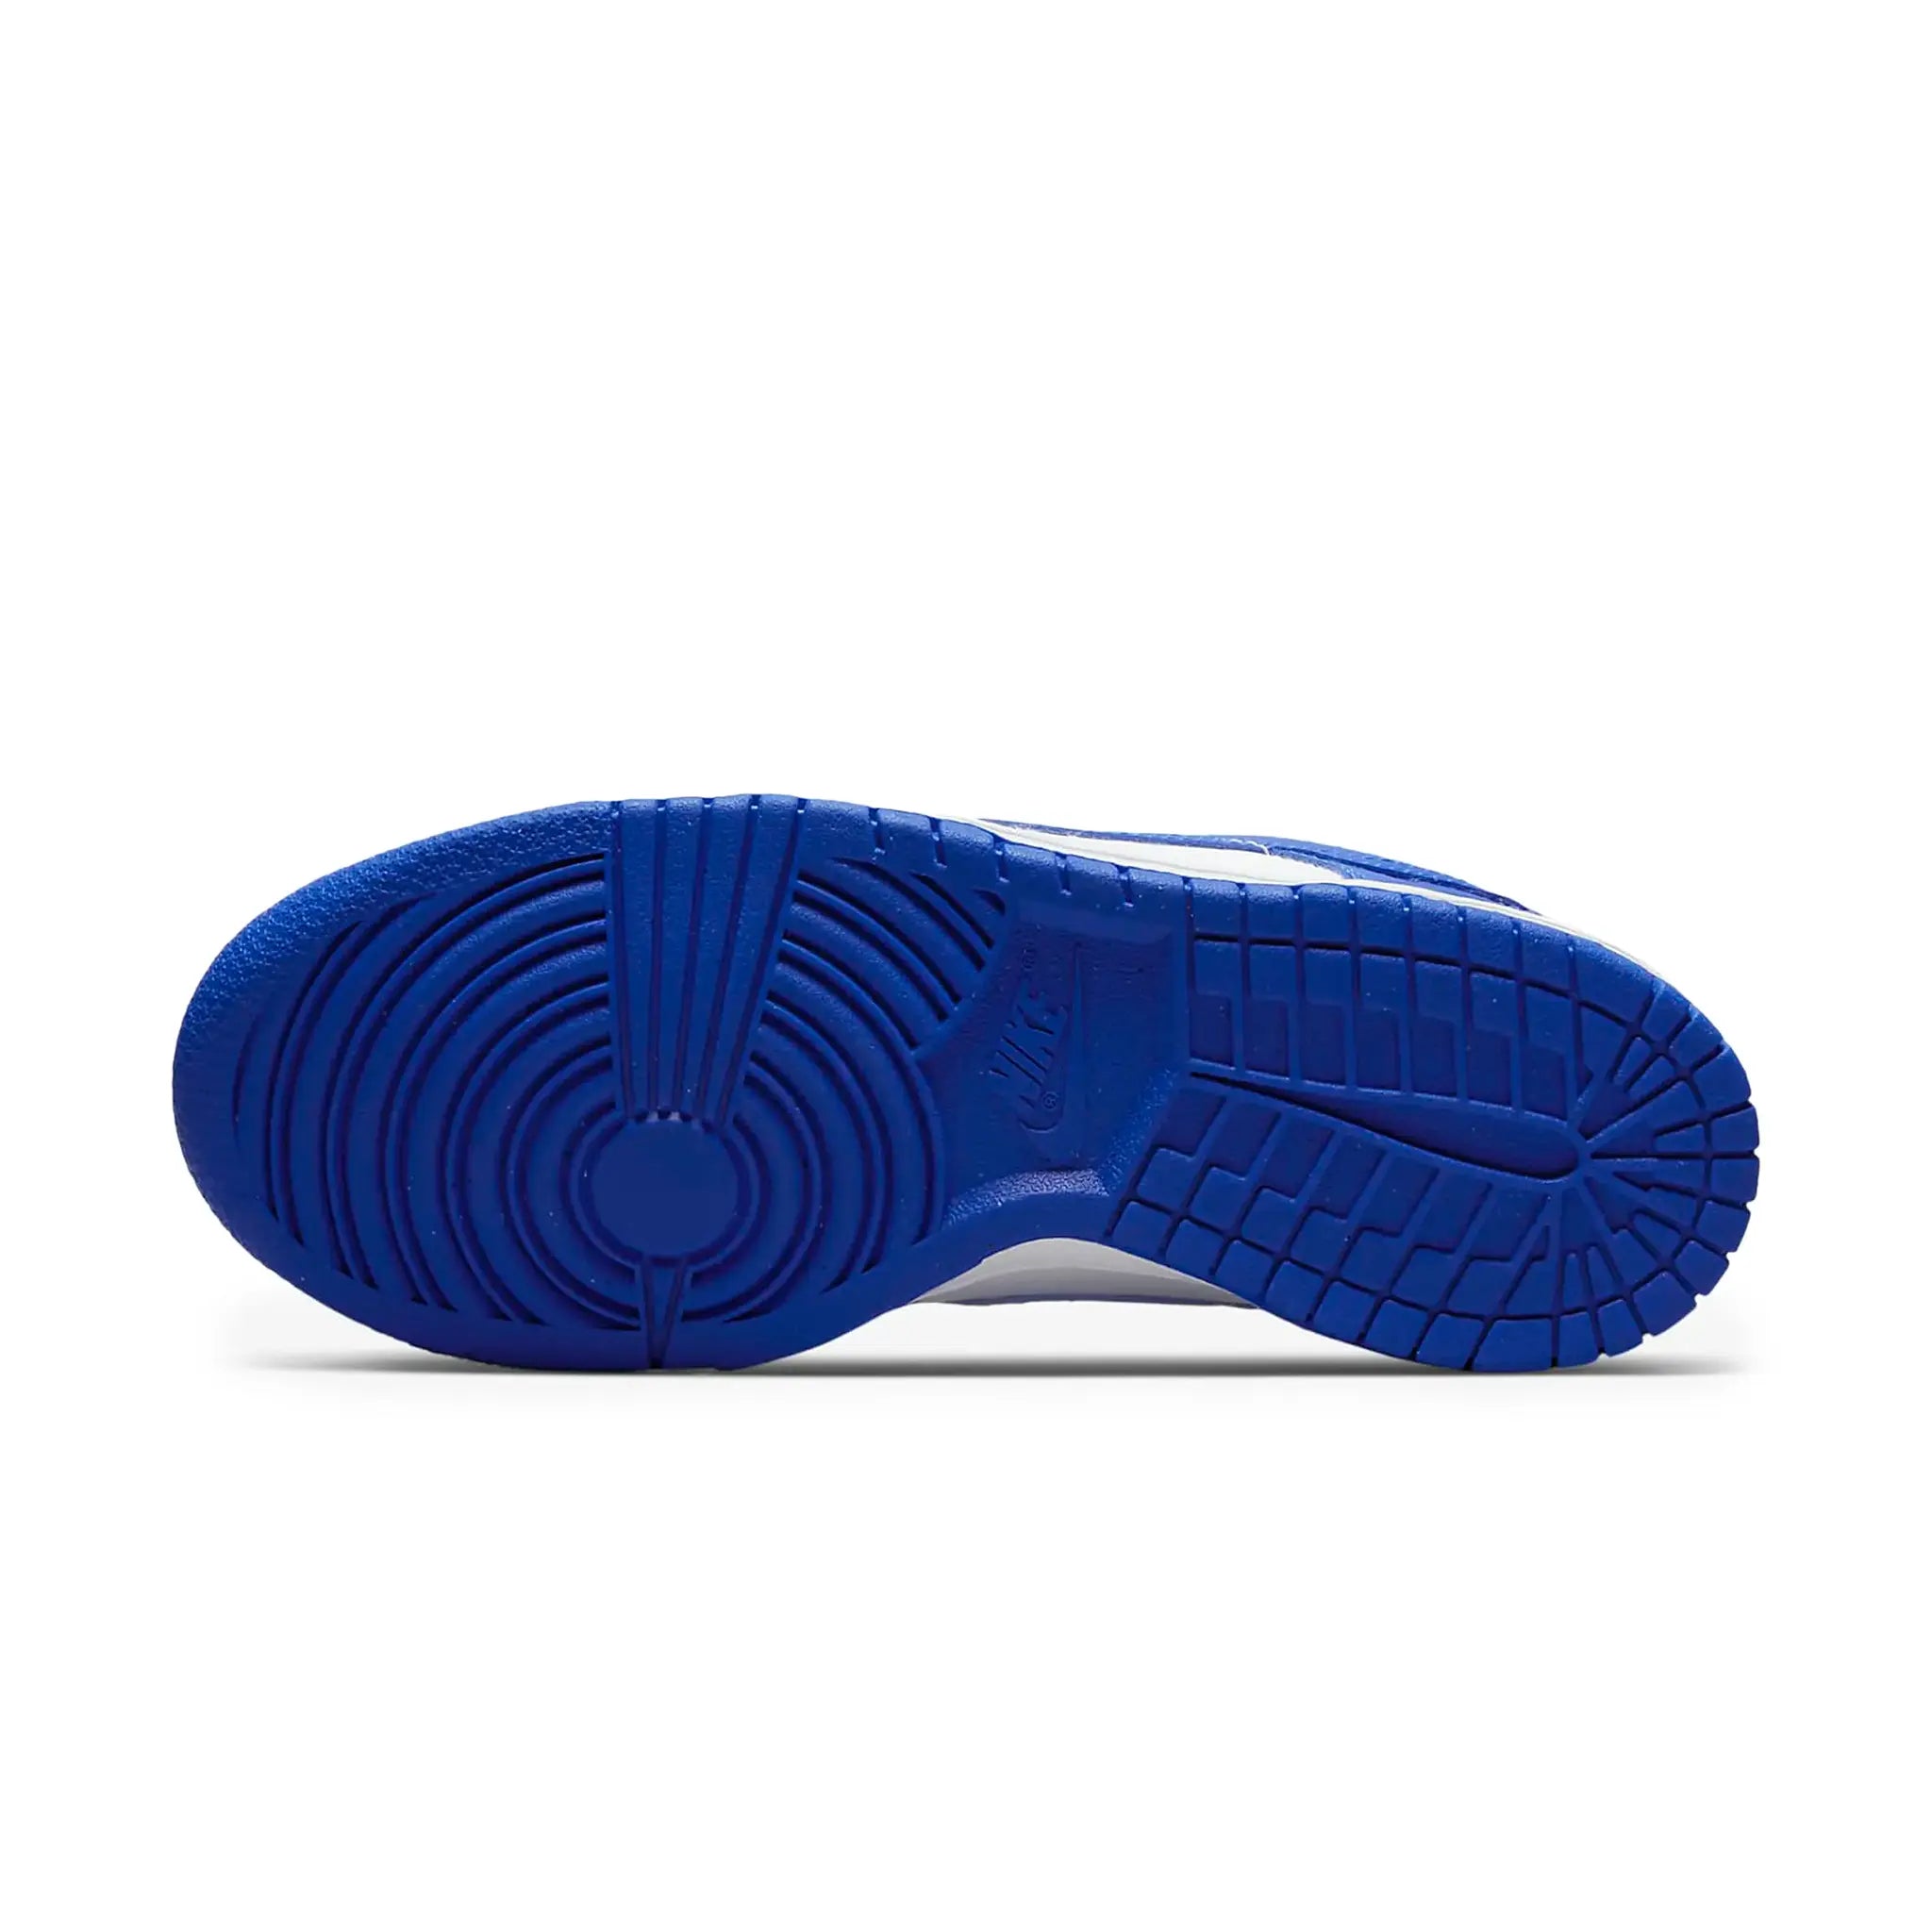 Sole view of Nike Dunk Low Racer Blue (GS) DV7067-400